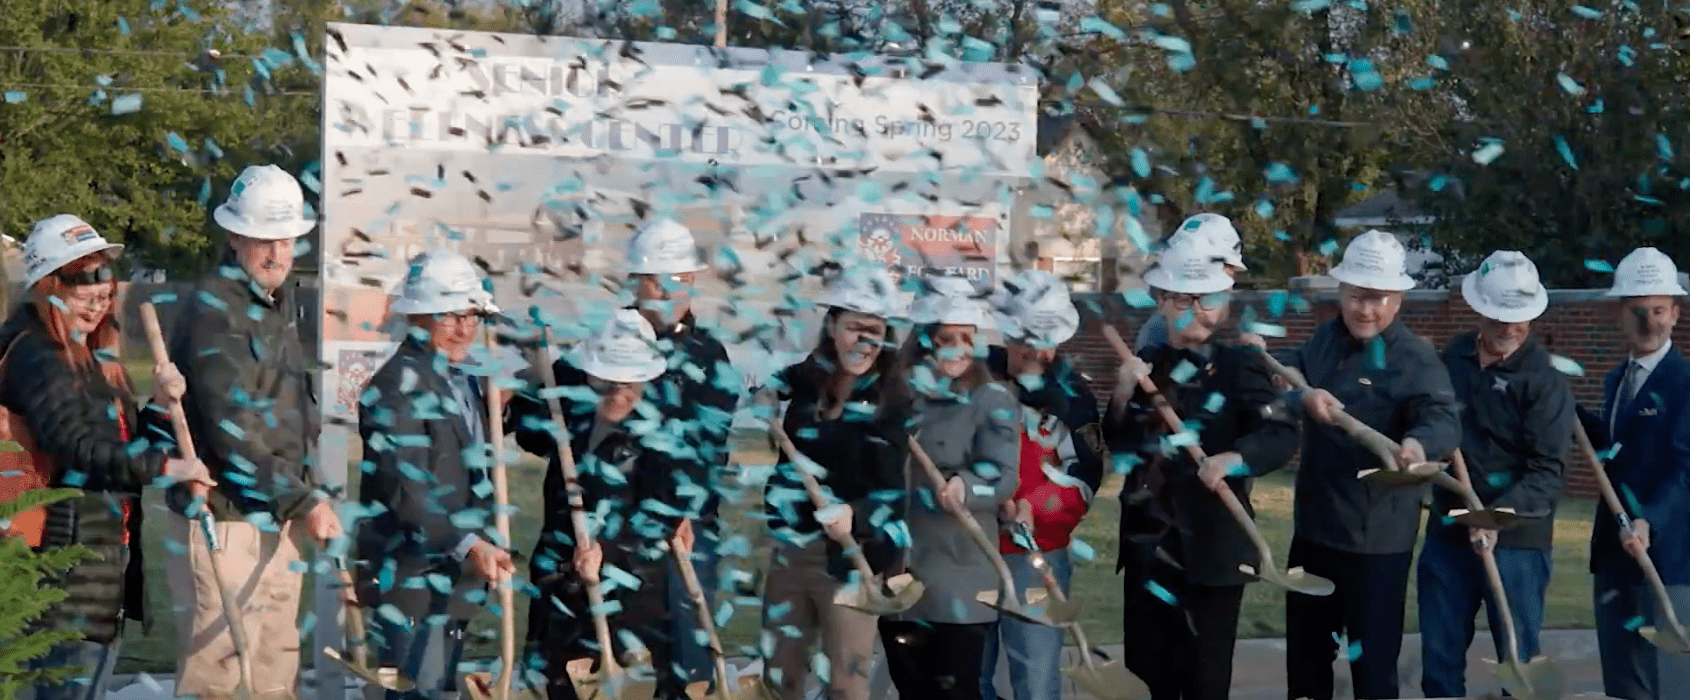 A group of people with shovels and confetti.